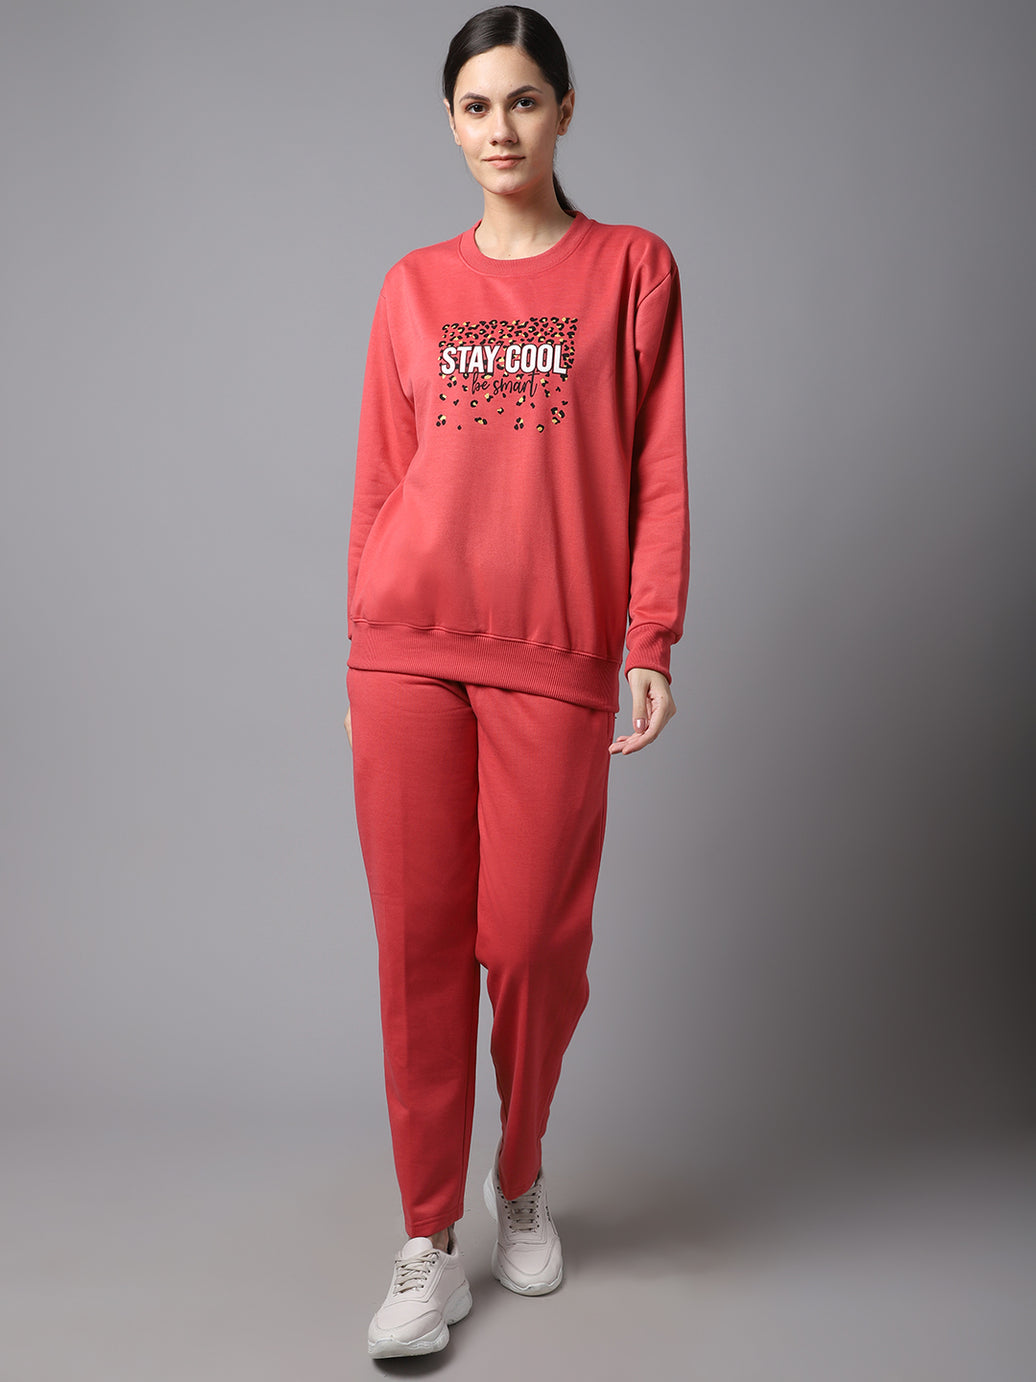 Womens Tracksuits - Buy Tracksuits for Women Online at Best Prices in India